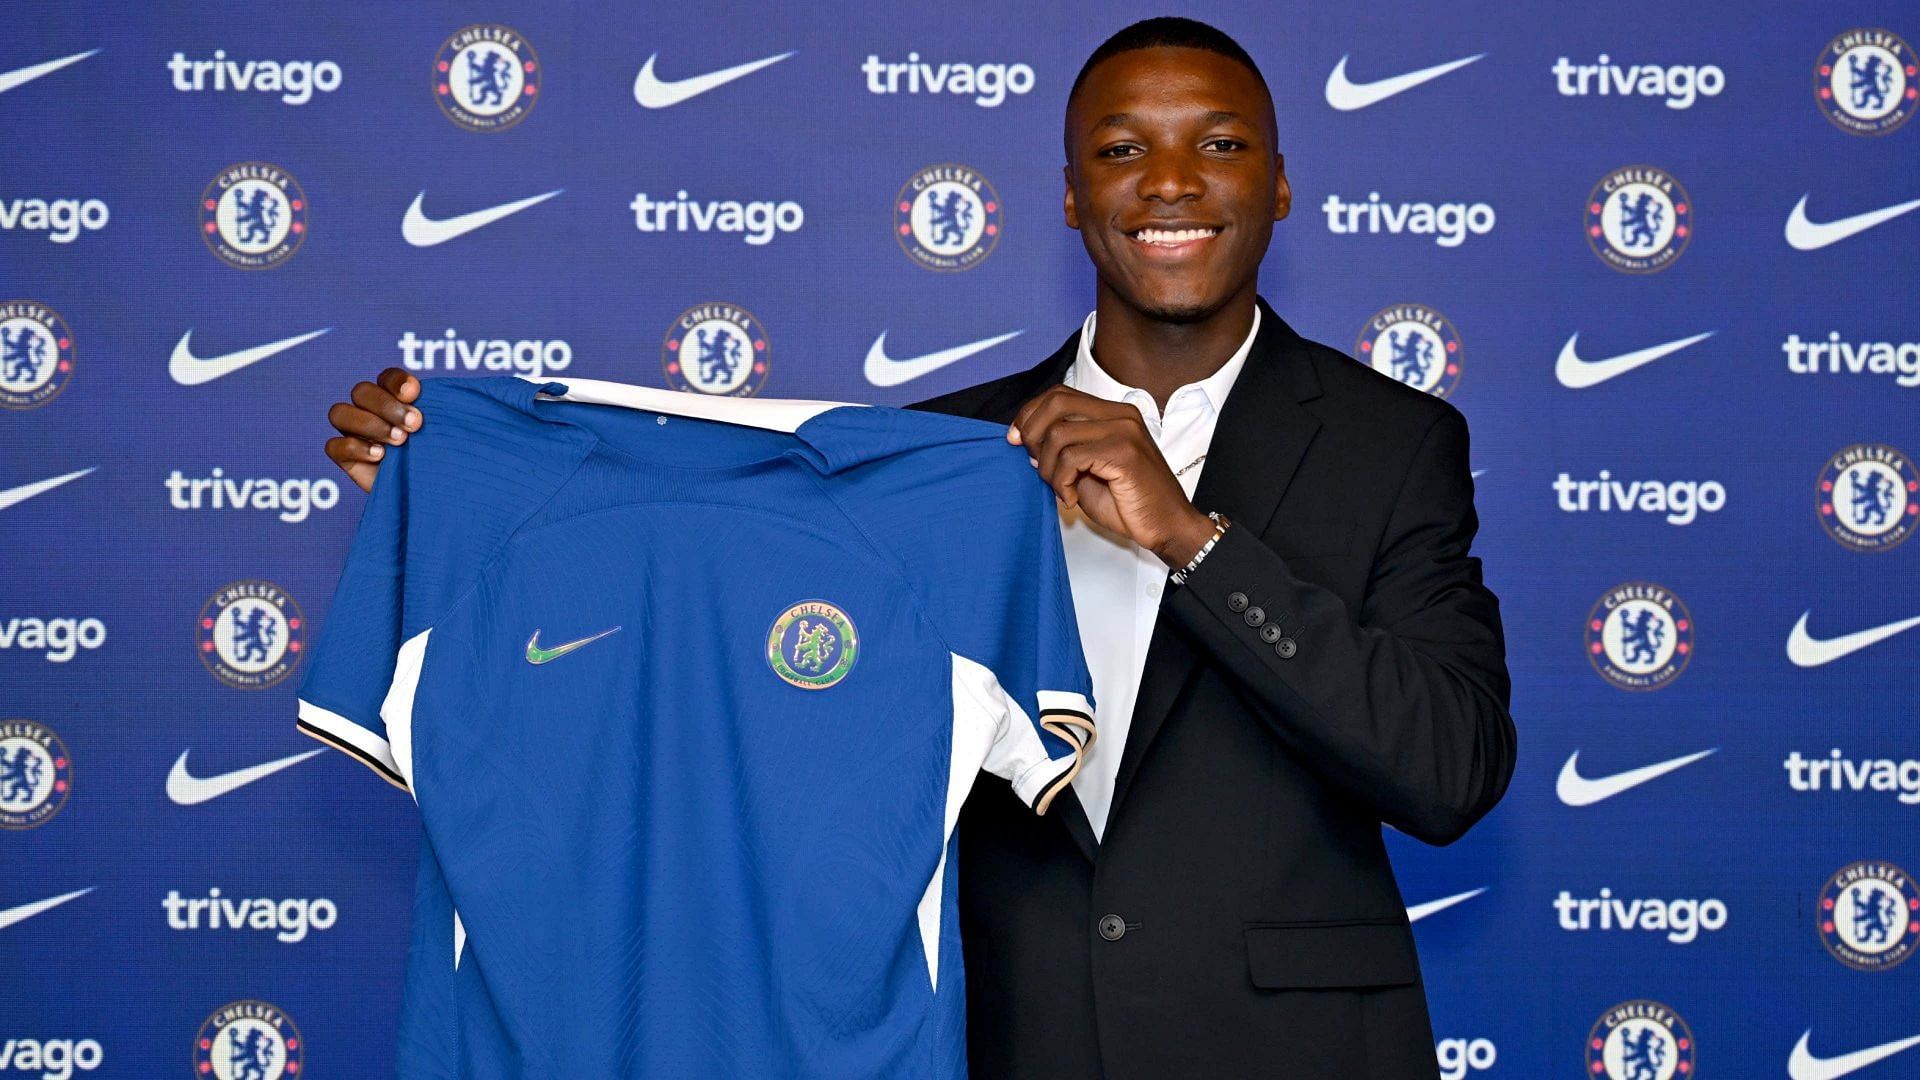 Moises Caicedo sealed his transfer to Chelsea